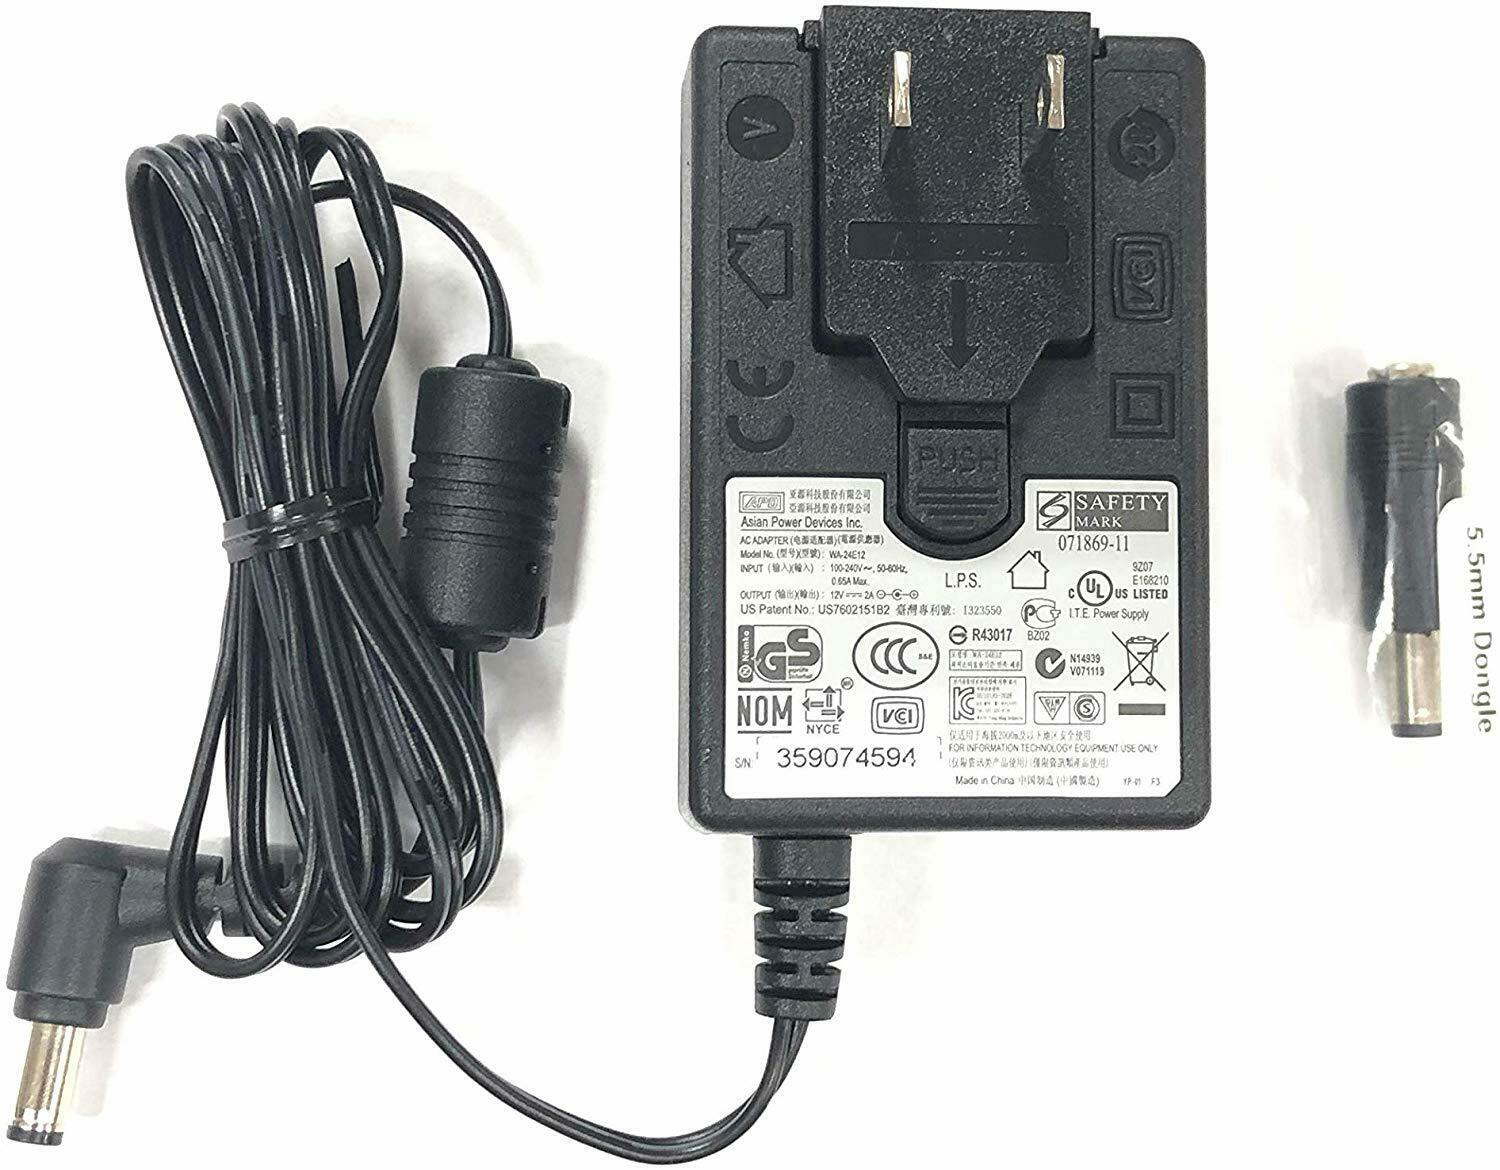 New Genuine APD 12V Adapter For WD WEWDBC3G0010 WDBC3G0010HAL-NESN Hard Drive MPN: WA-24E12 Compatible Model: WD Vo